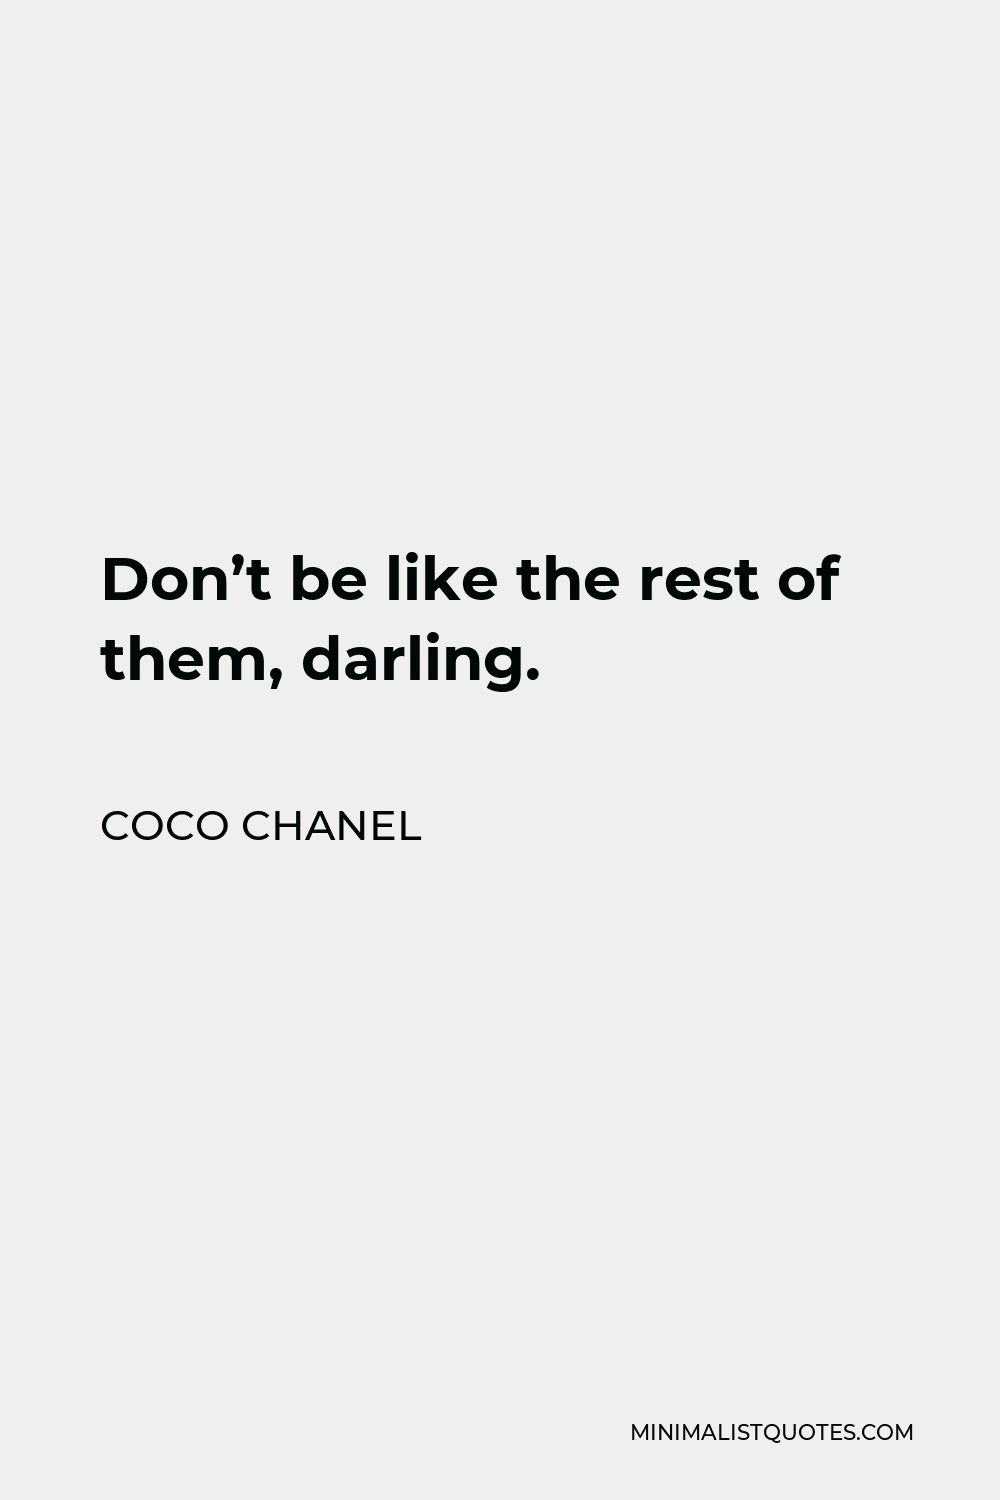 Coco Chanel Quote - Don’t be like the rest of them, darling.